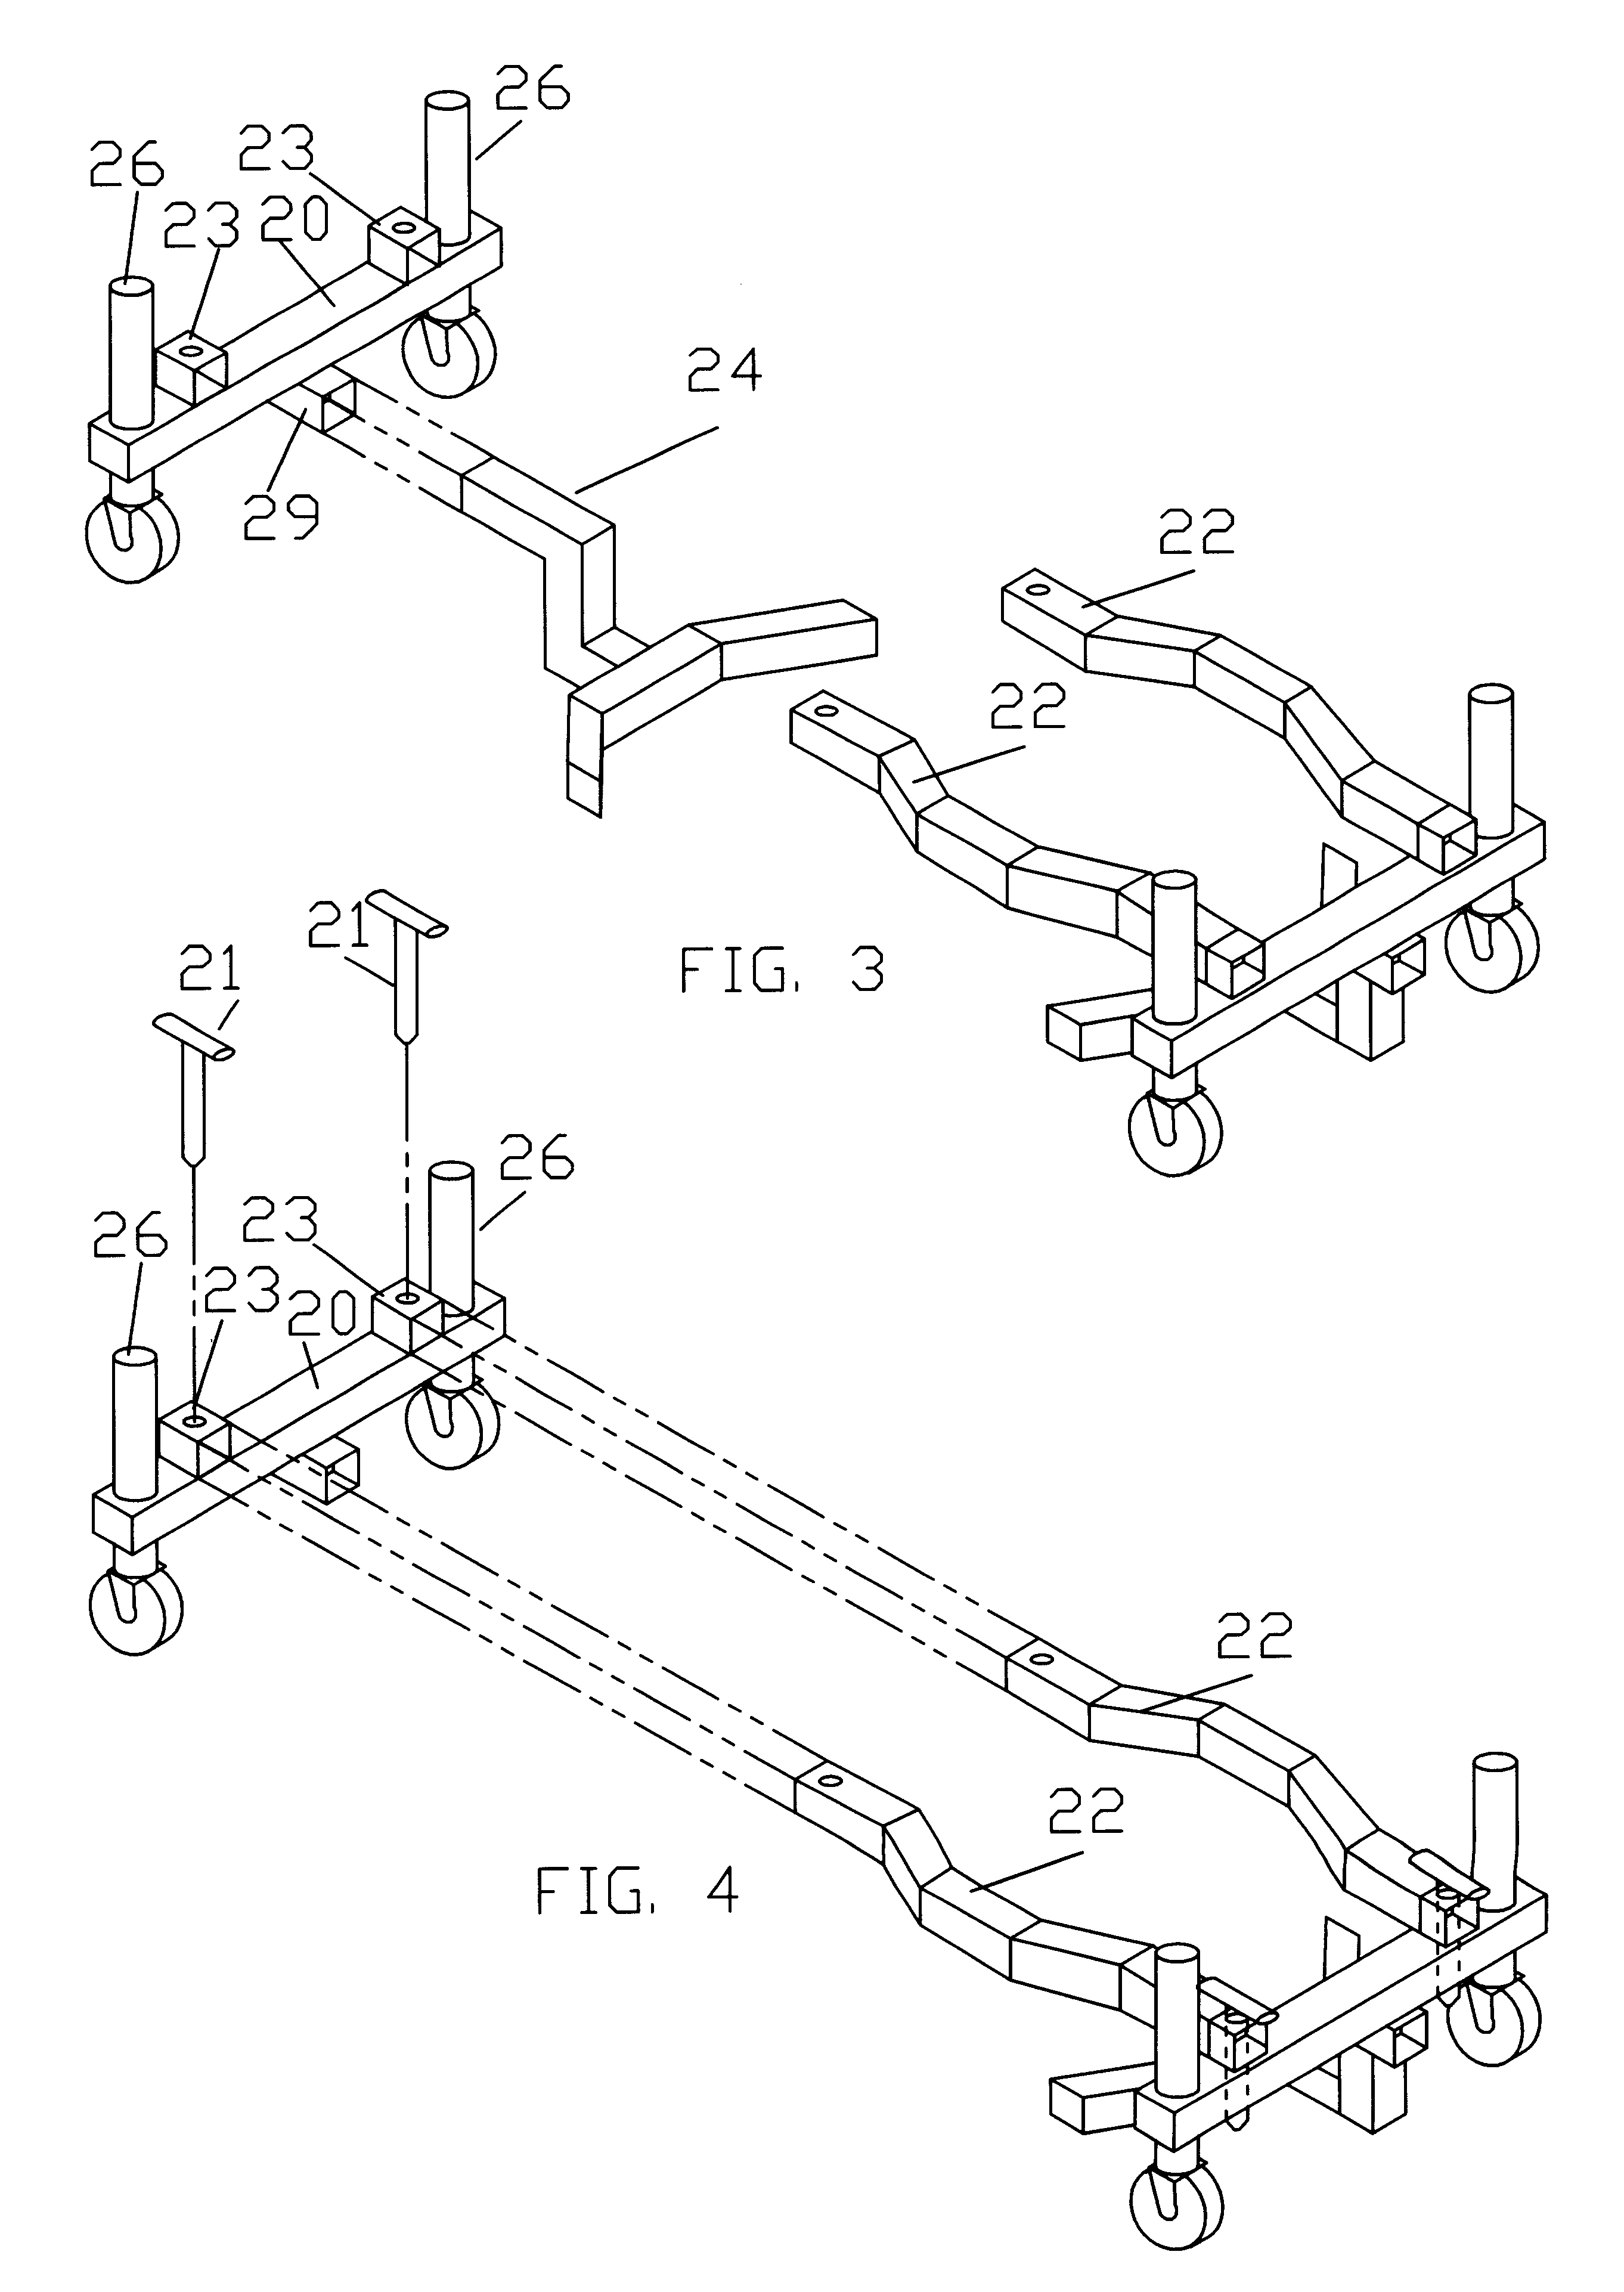 Fire suppression agent storage container lifting and transportation device